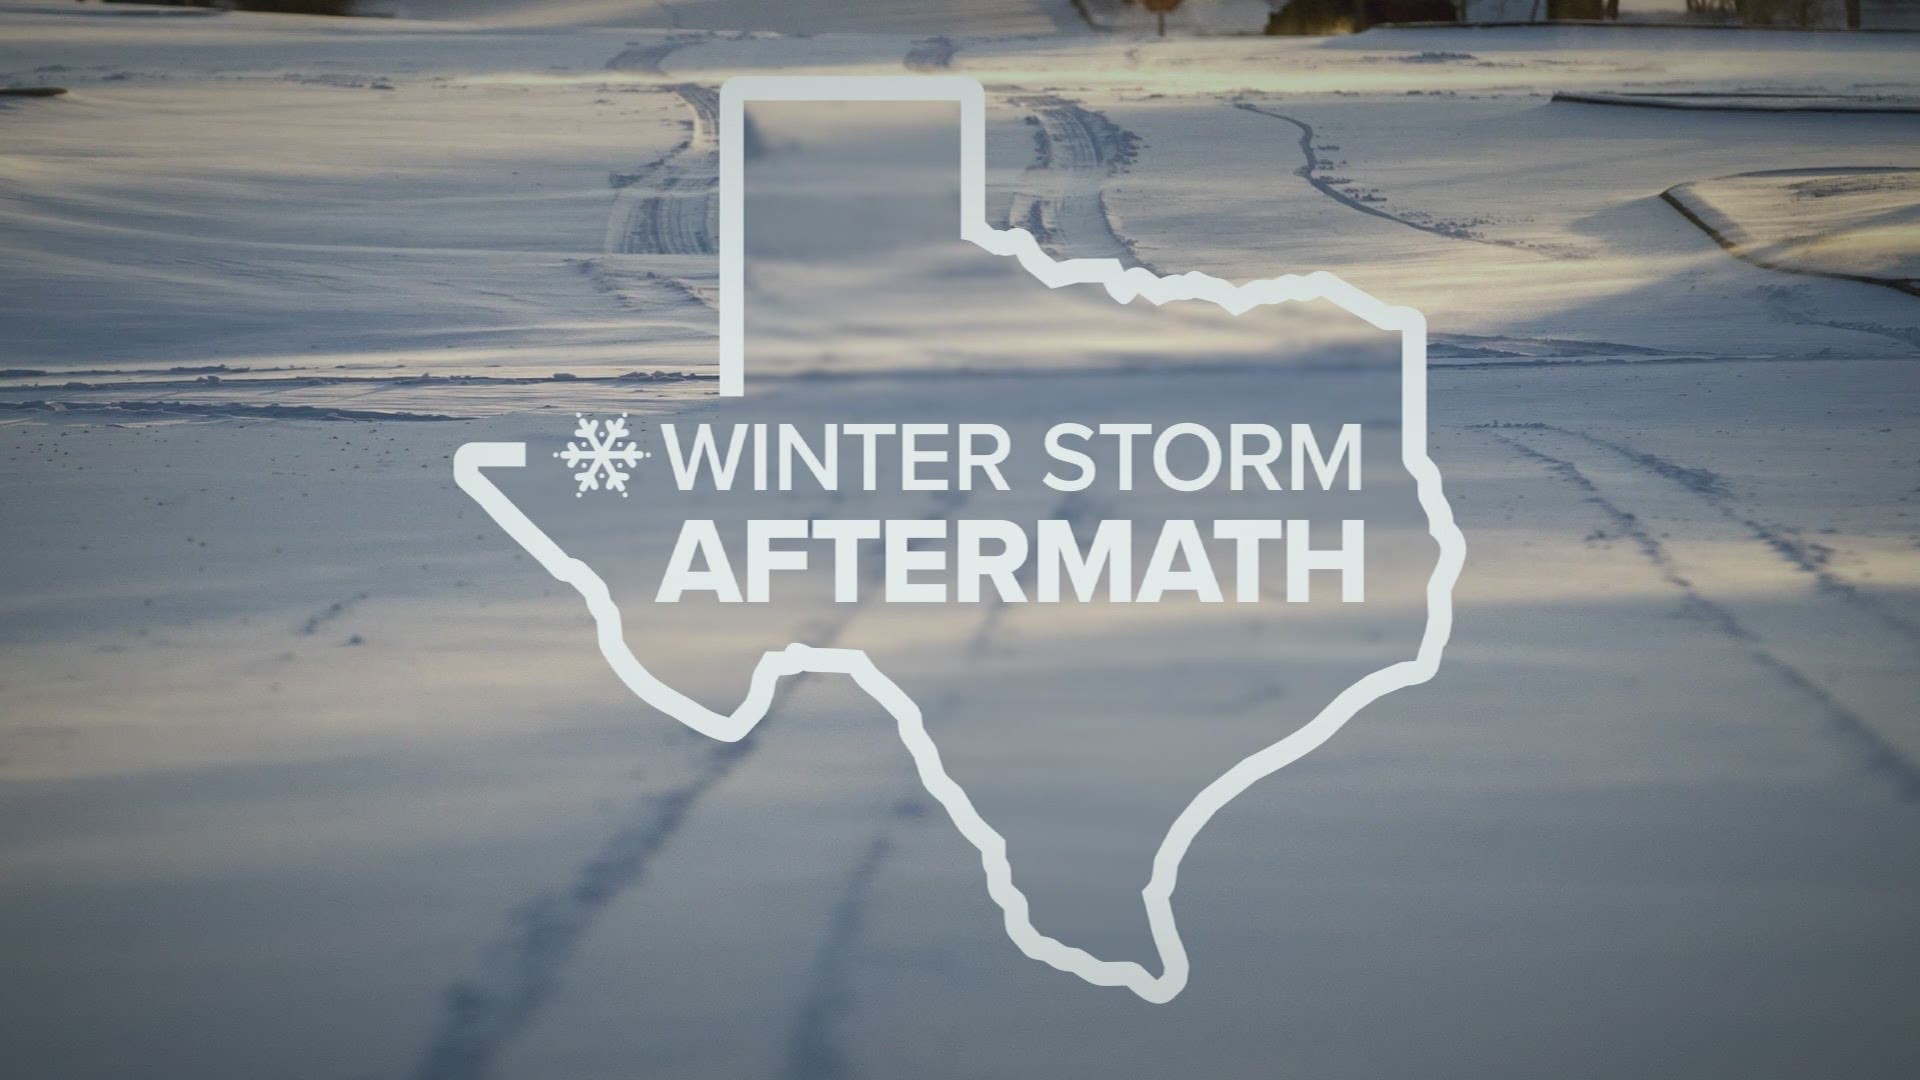 We're following the very latest on the aftermath of the winter storm we had last week.